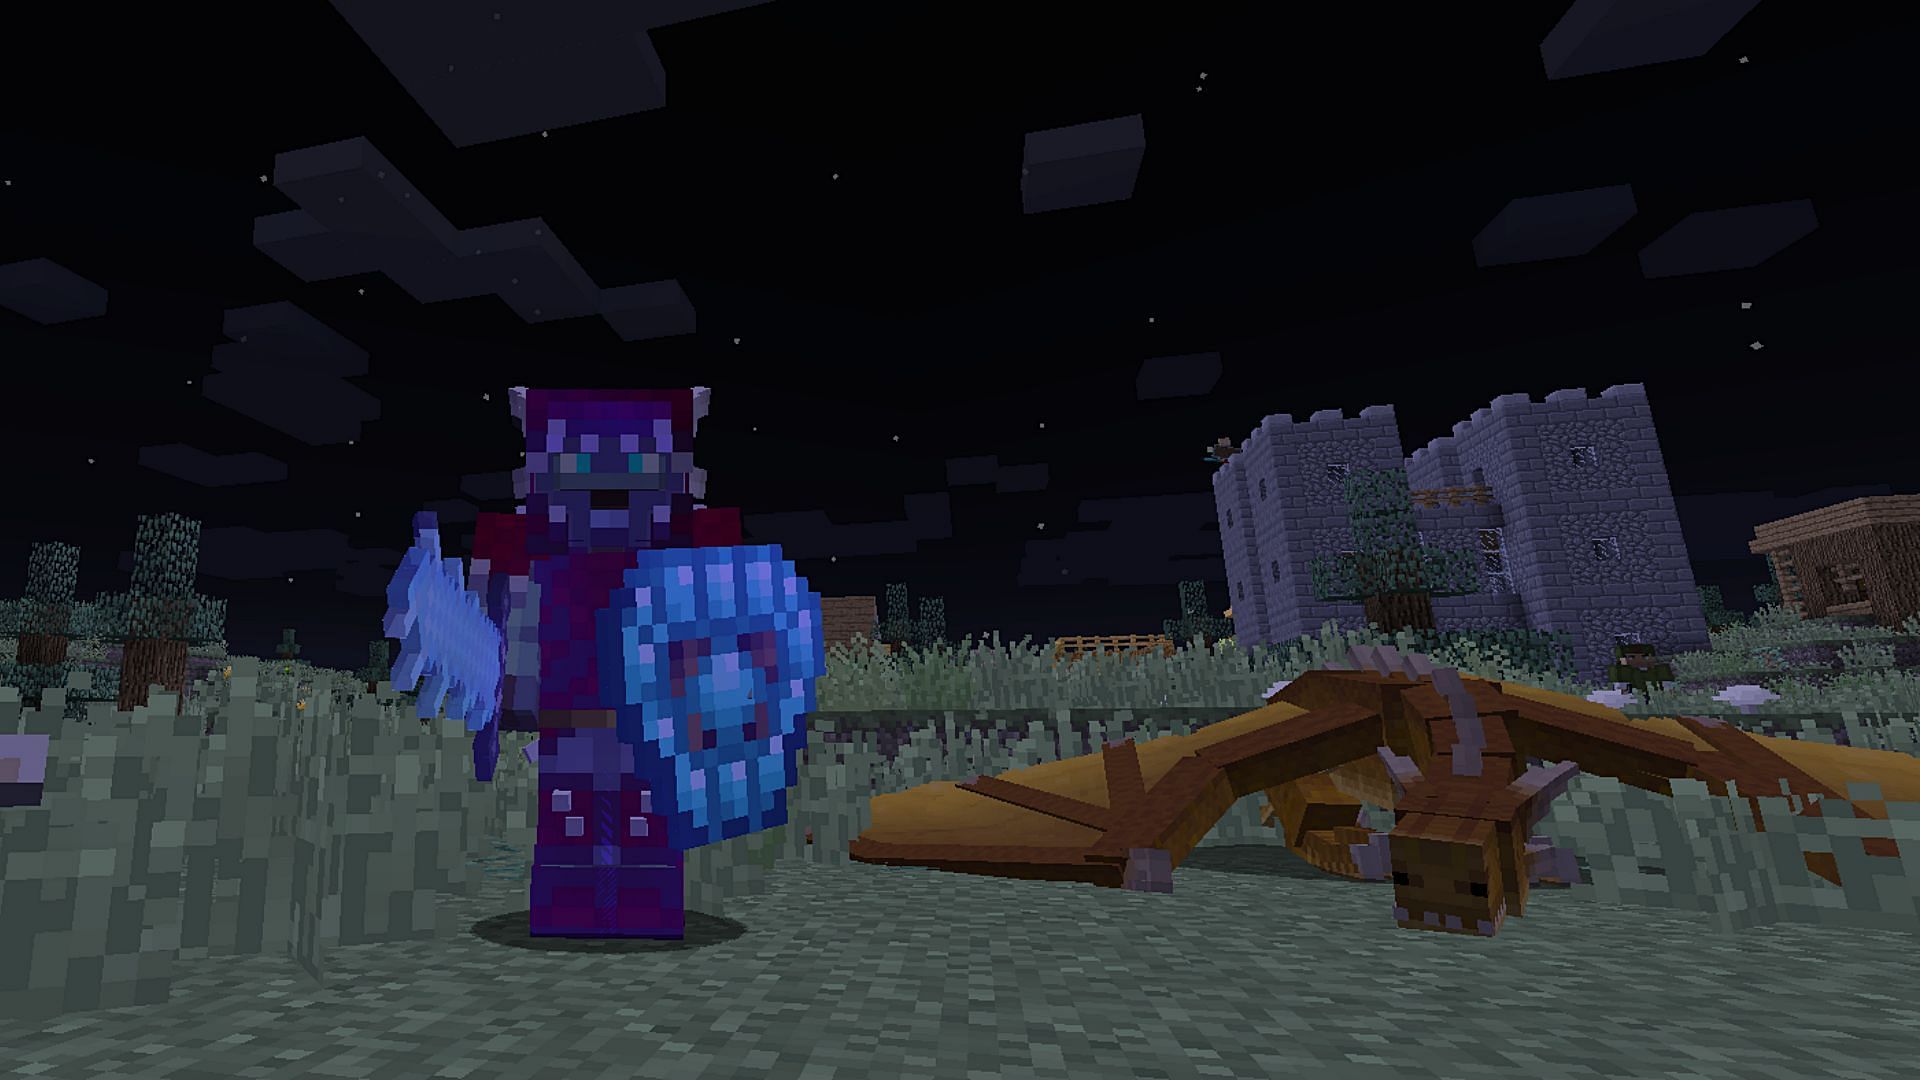 Players can interact with dragons in this Minecraft modpack (Image via CurseForge)